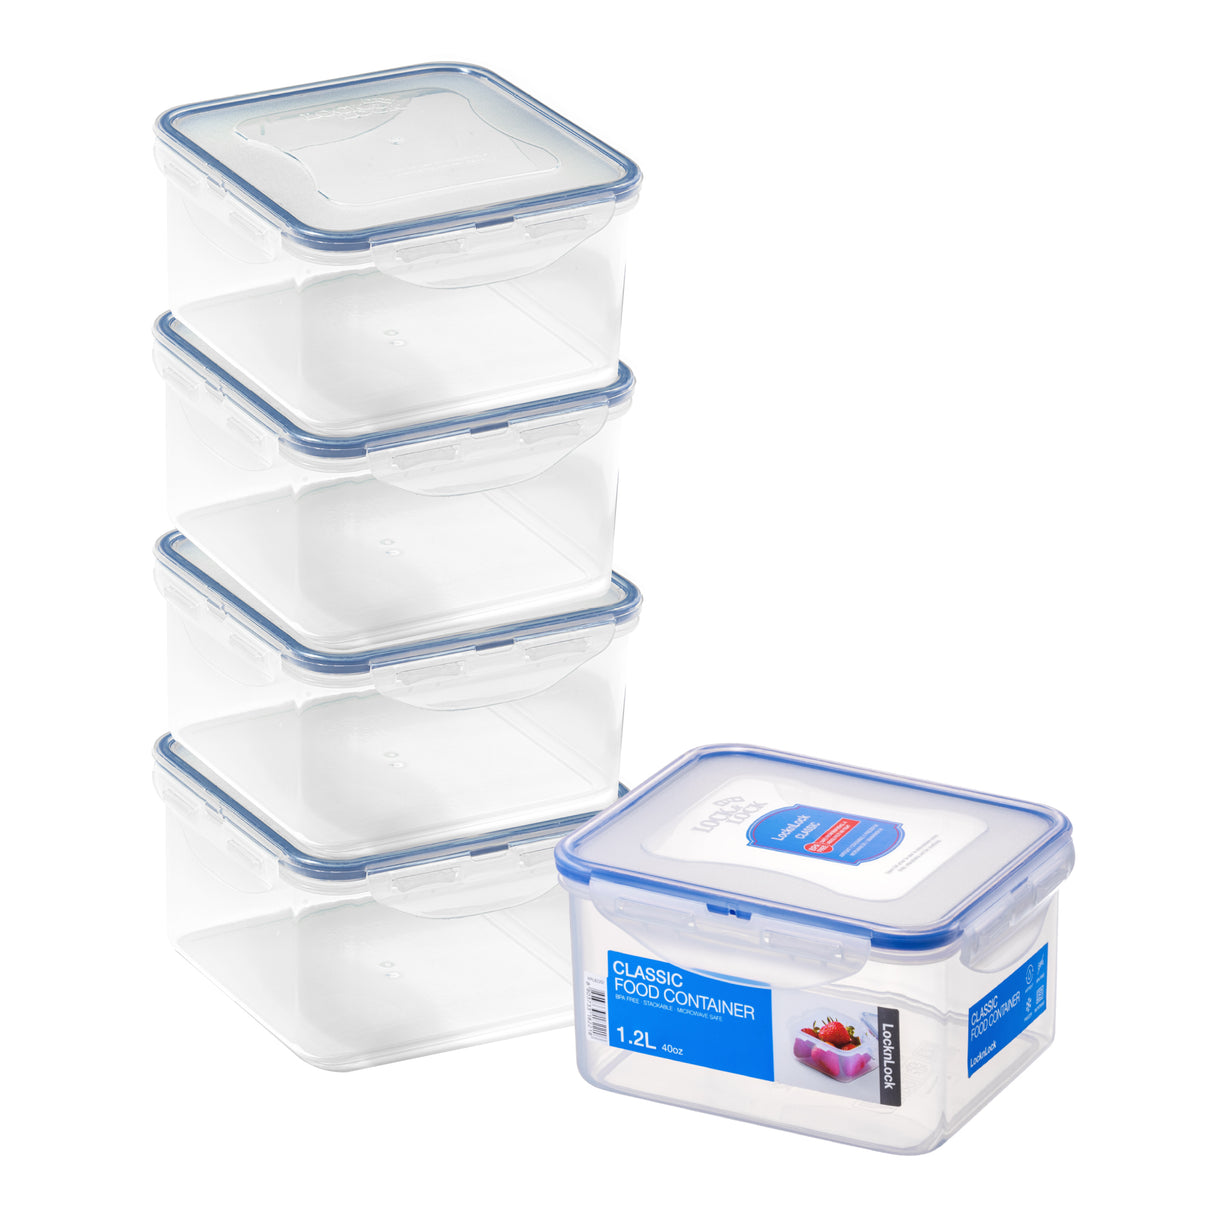 Set of 5 food storage containers from LocknLock